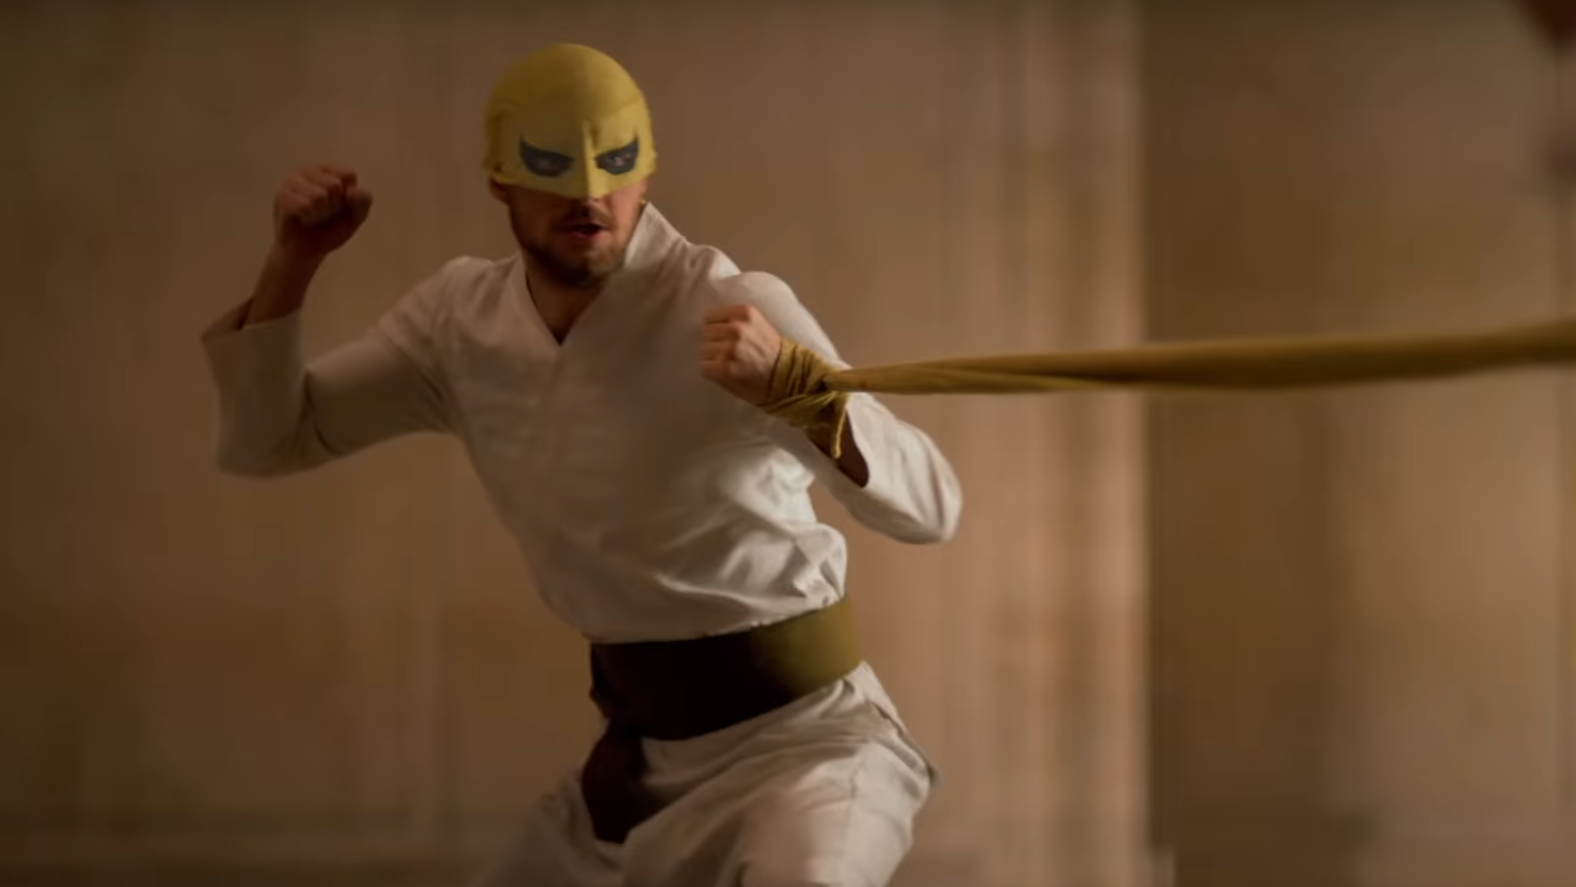 The Newest Iron Fist Teaser Gives Us Our Best Look Yet At Danny Rand’s Comics-Inspired Look